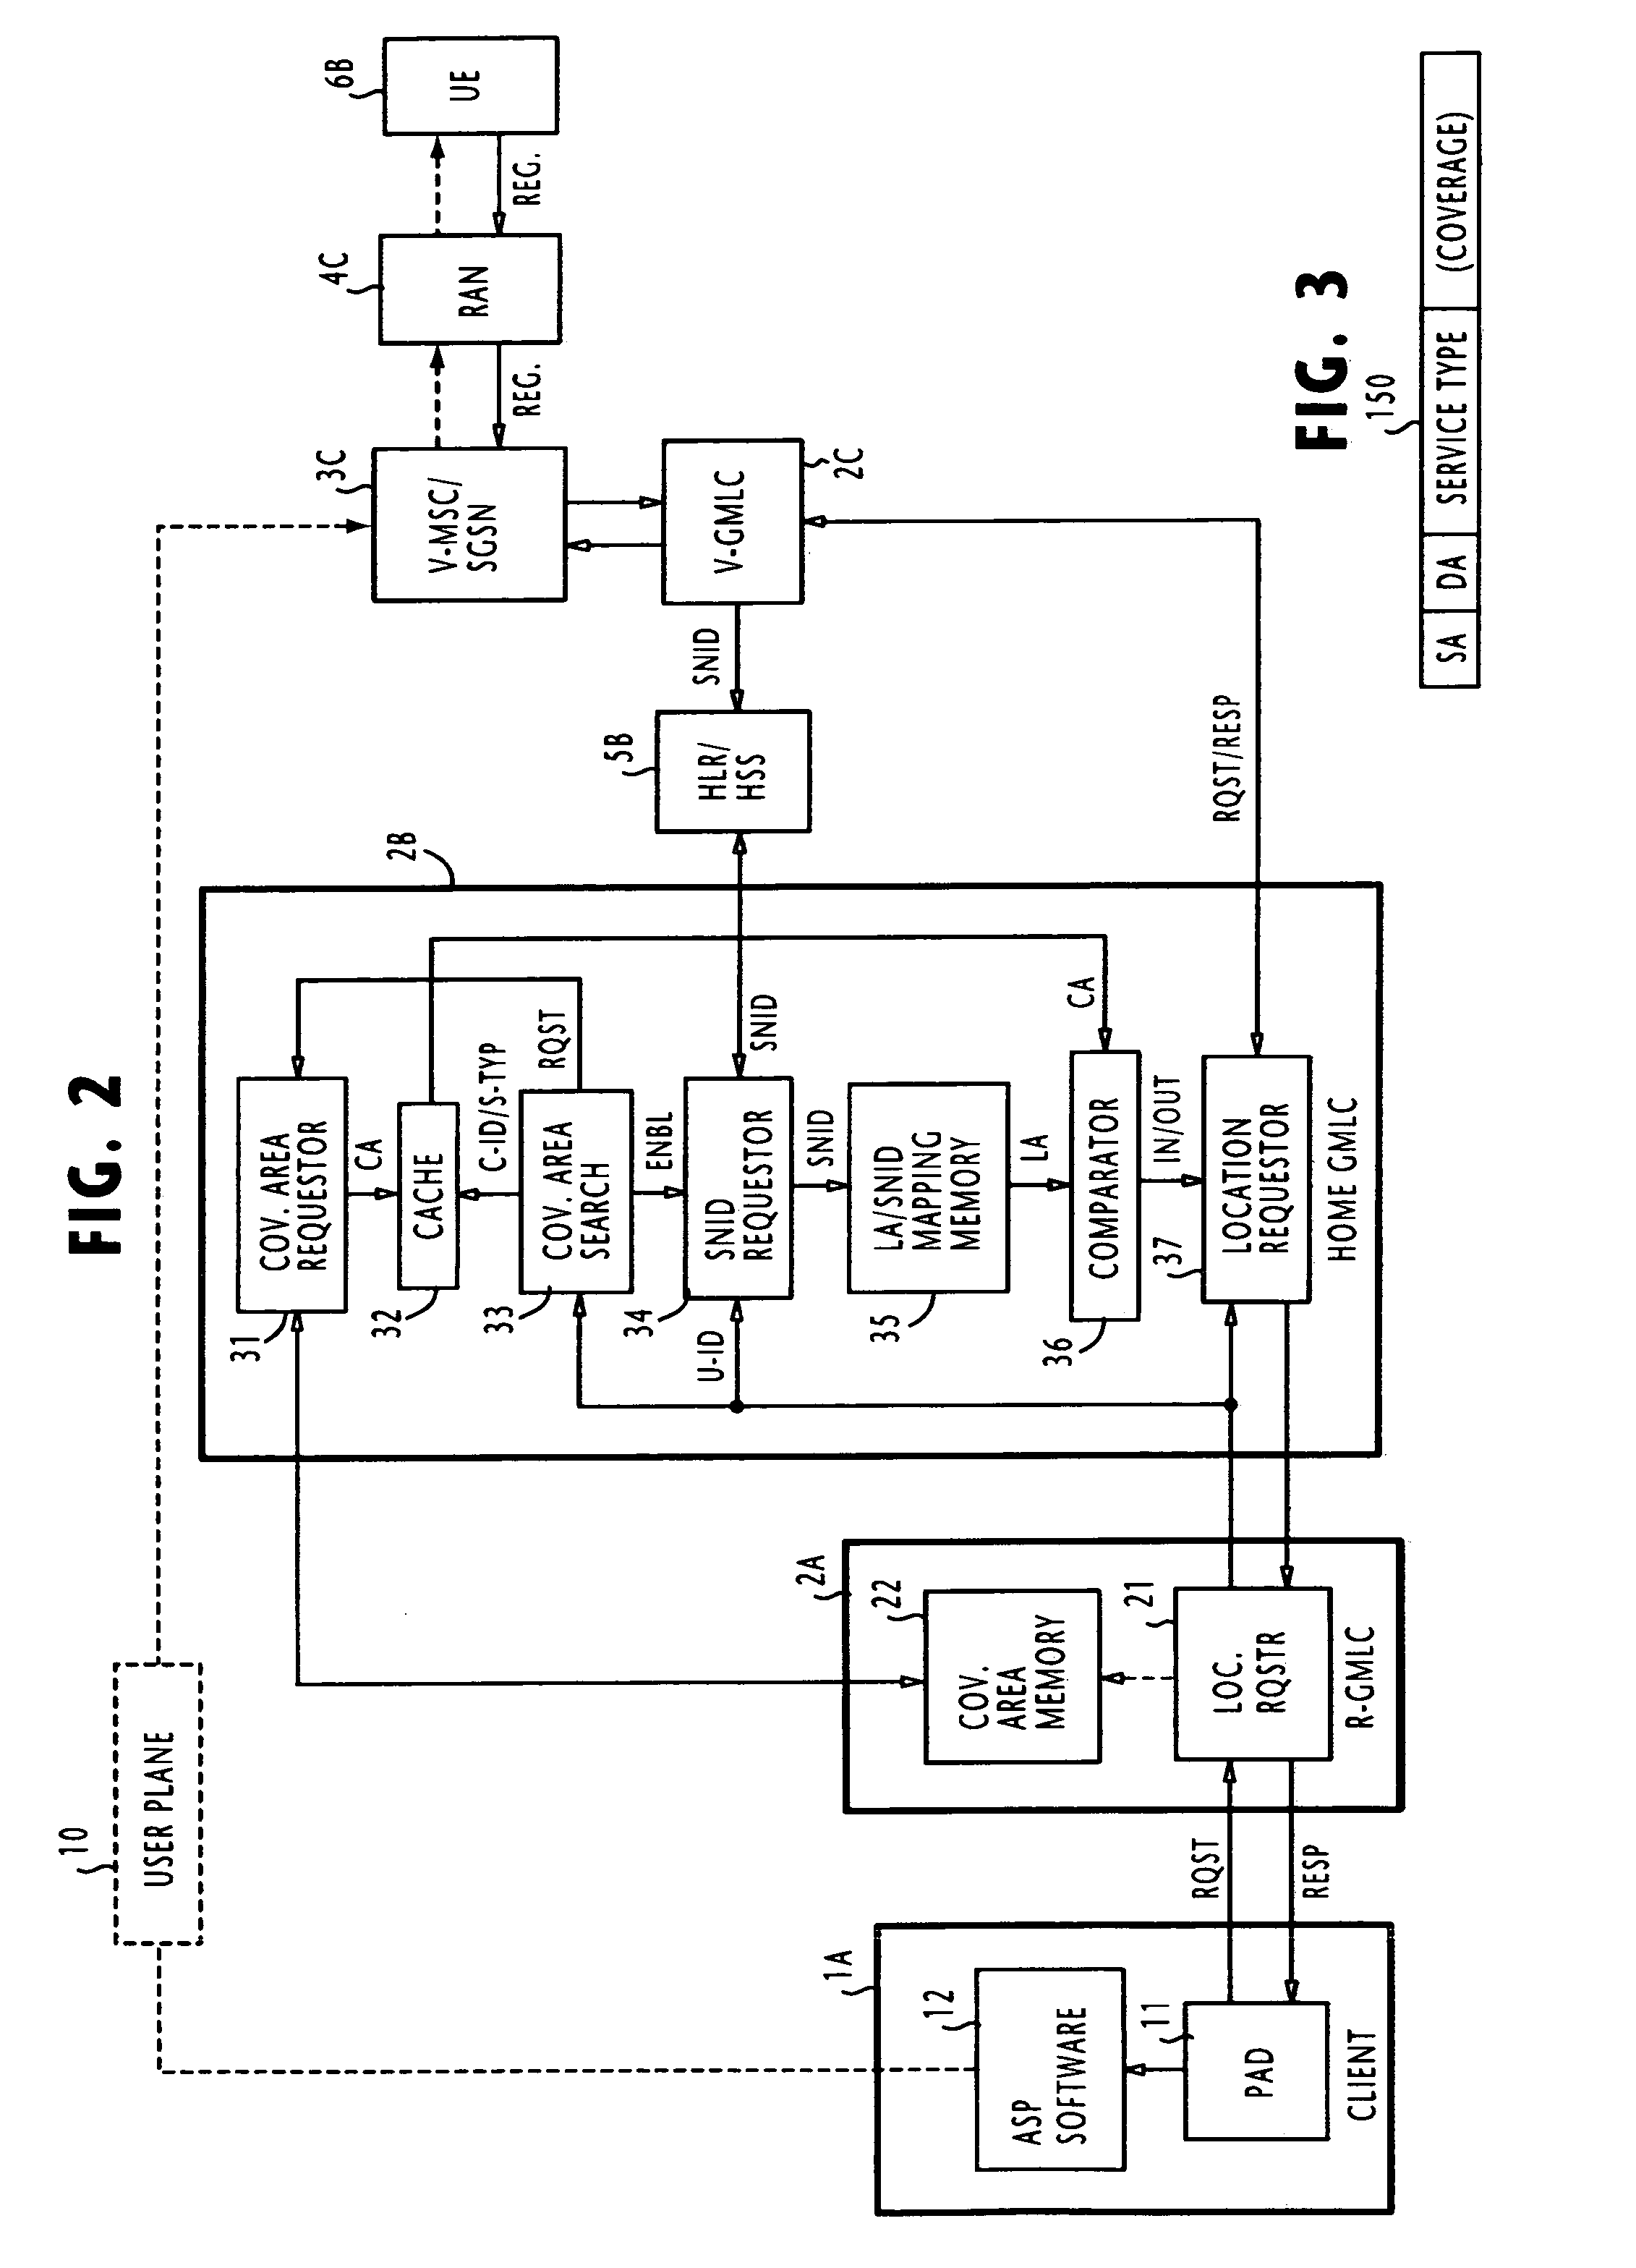 Location system and method for client terminals which provide location-based service to mobile terminals